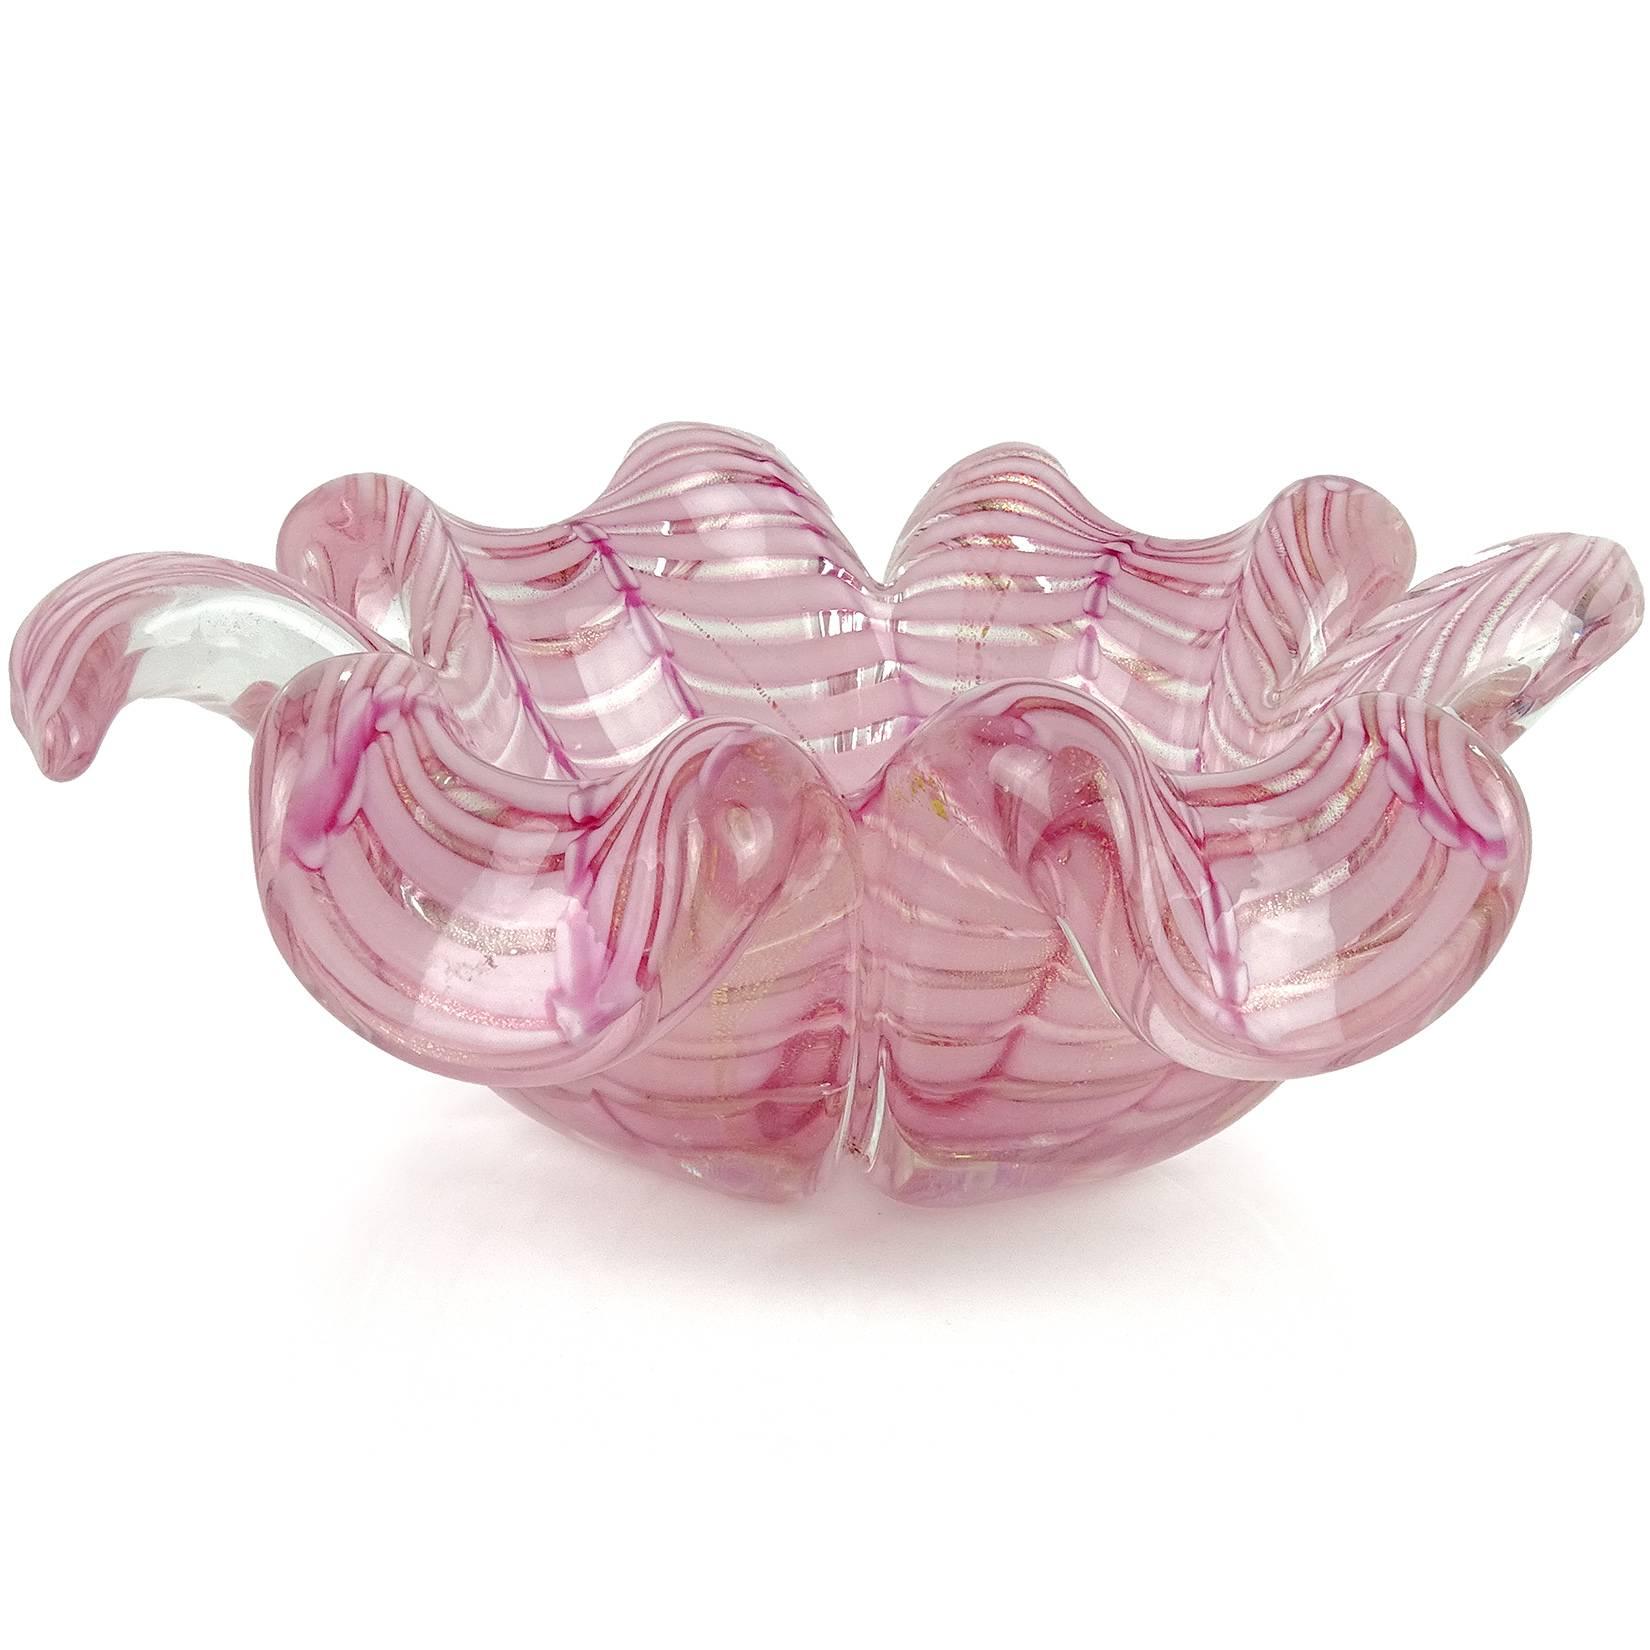 Beautiful Murano hand blown pink and gold flecks Italian art glass flower shaped bowl. Documented to designer Ercole Barovier for the Barovier e Toso company, circa 1960s. Created in the "Graffito" technique. The design looks like a